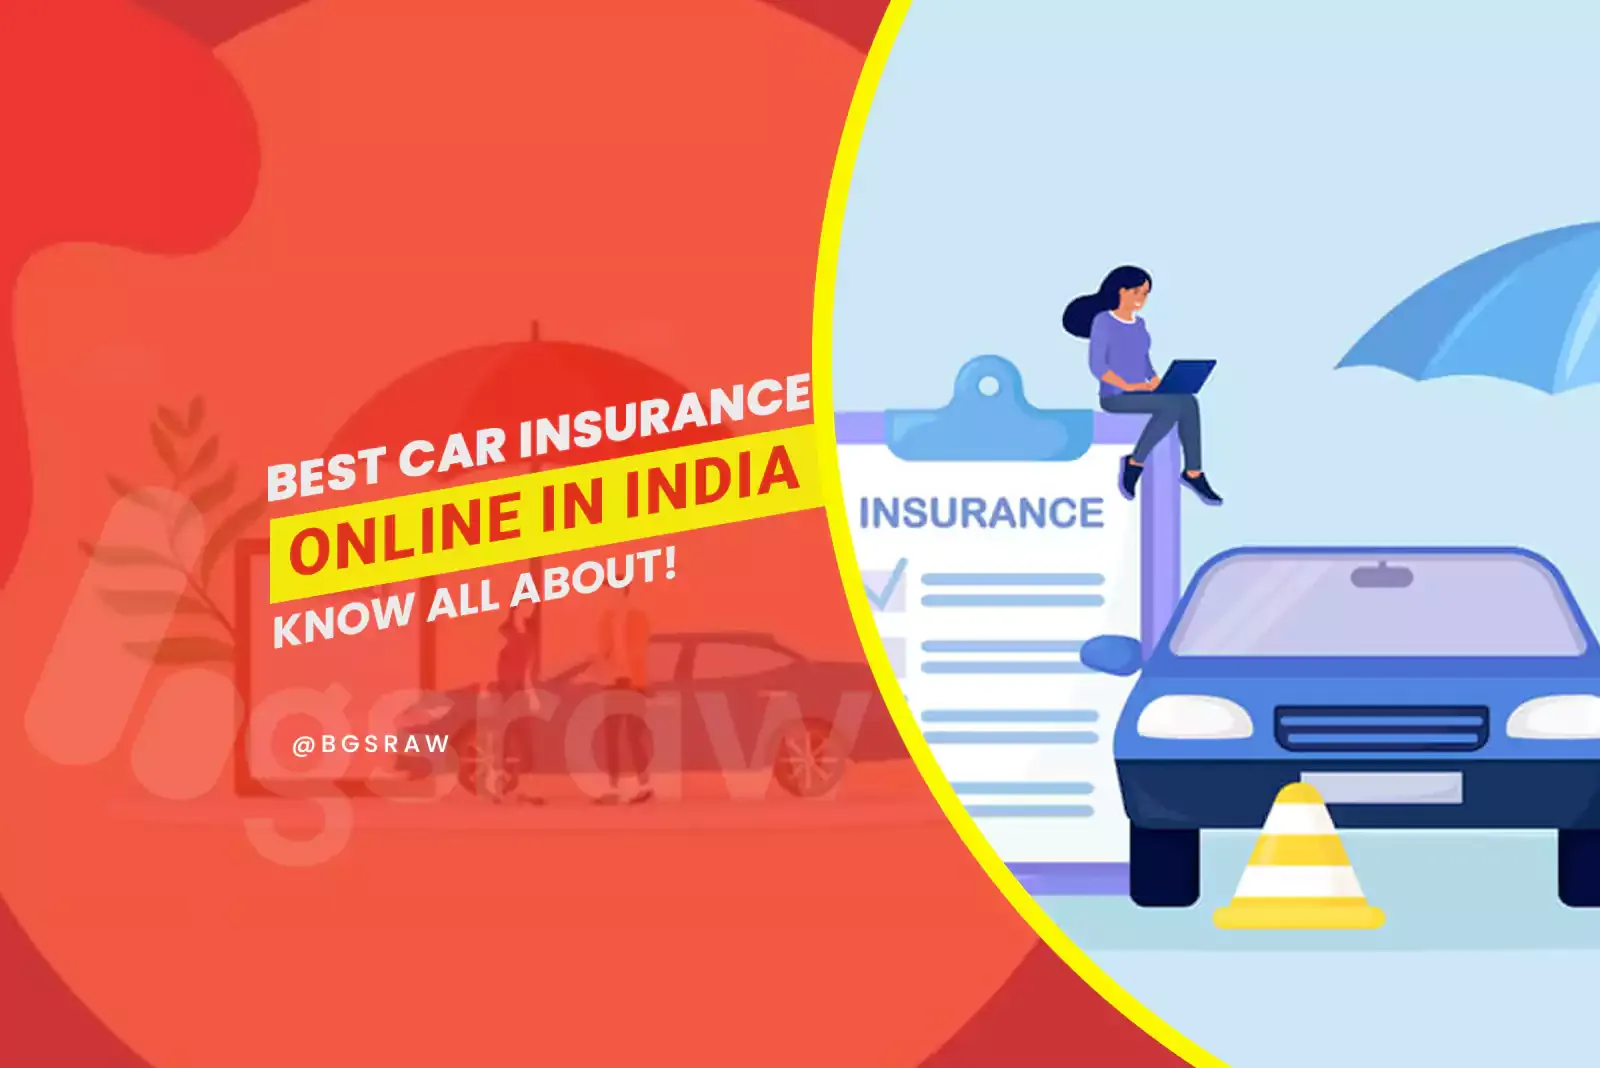 Best Car insurance online in India, Know all about New/Renewal Policy